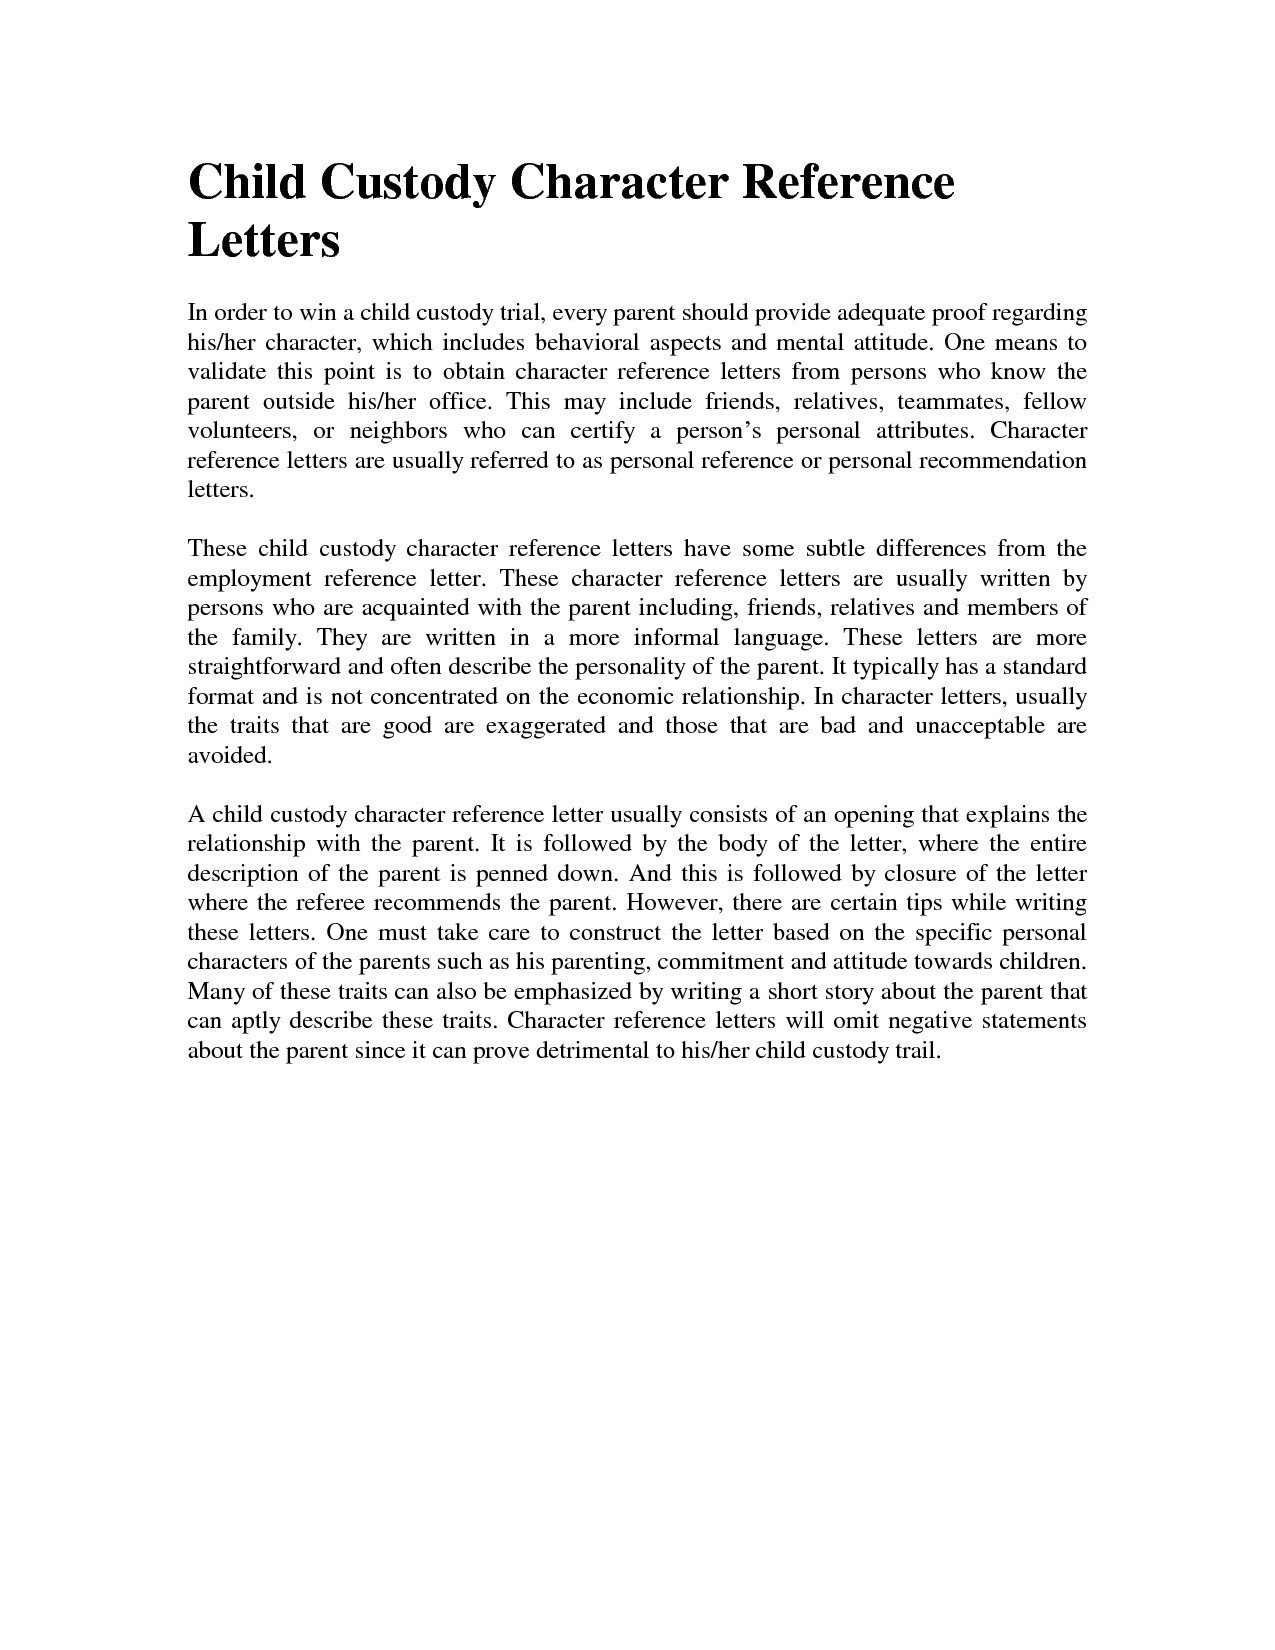 Character Reference Letter for Court Child Custody